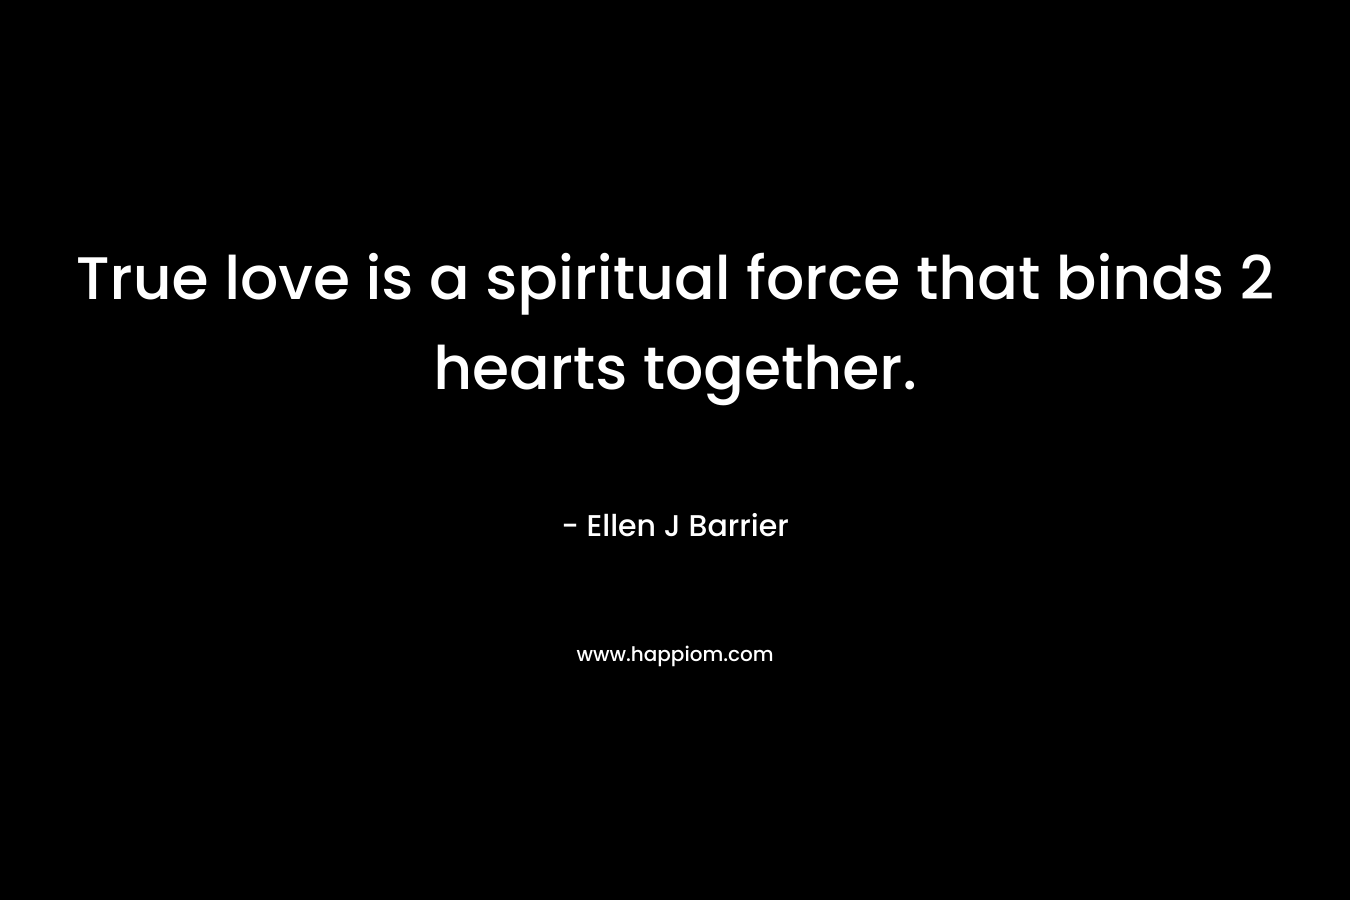 True love is a spiritual force that binds 2 hearts together.